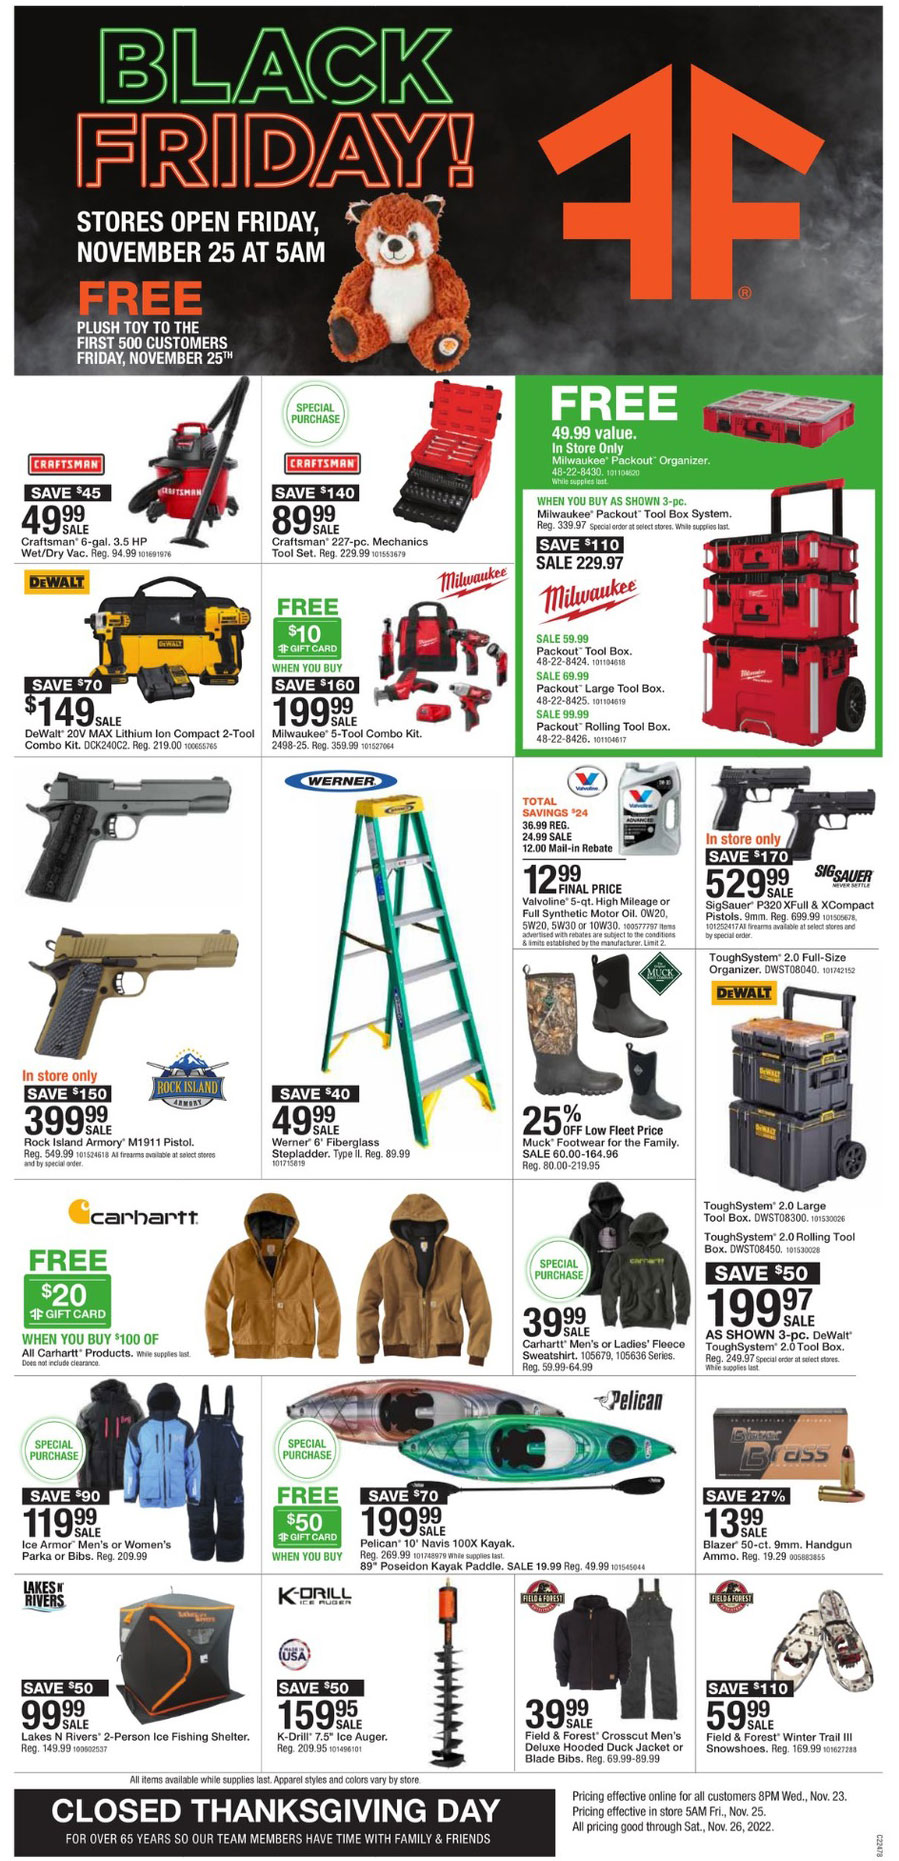 Mills Fleet Farm Black Friday 2022 Ad, Deals, and Sale Info - Does Ross Have Any Black Friday Deals